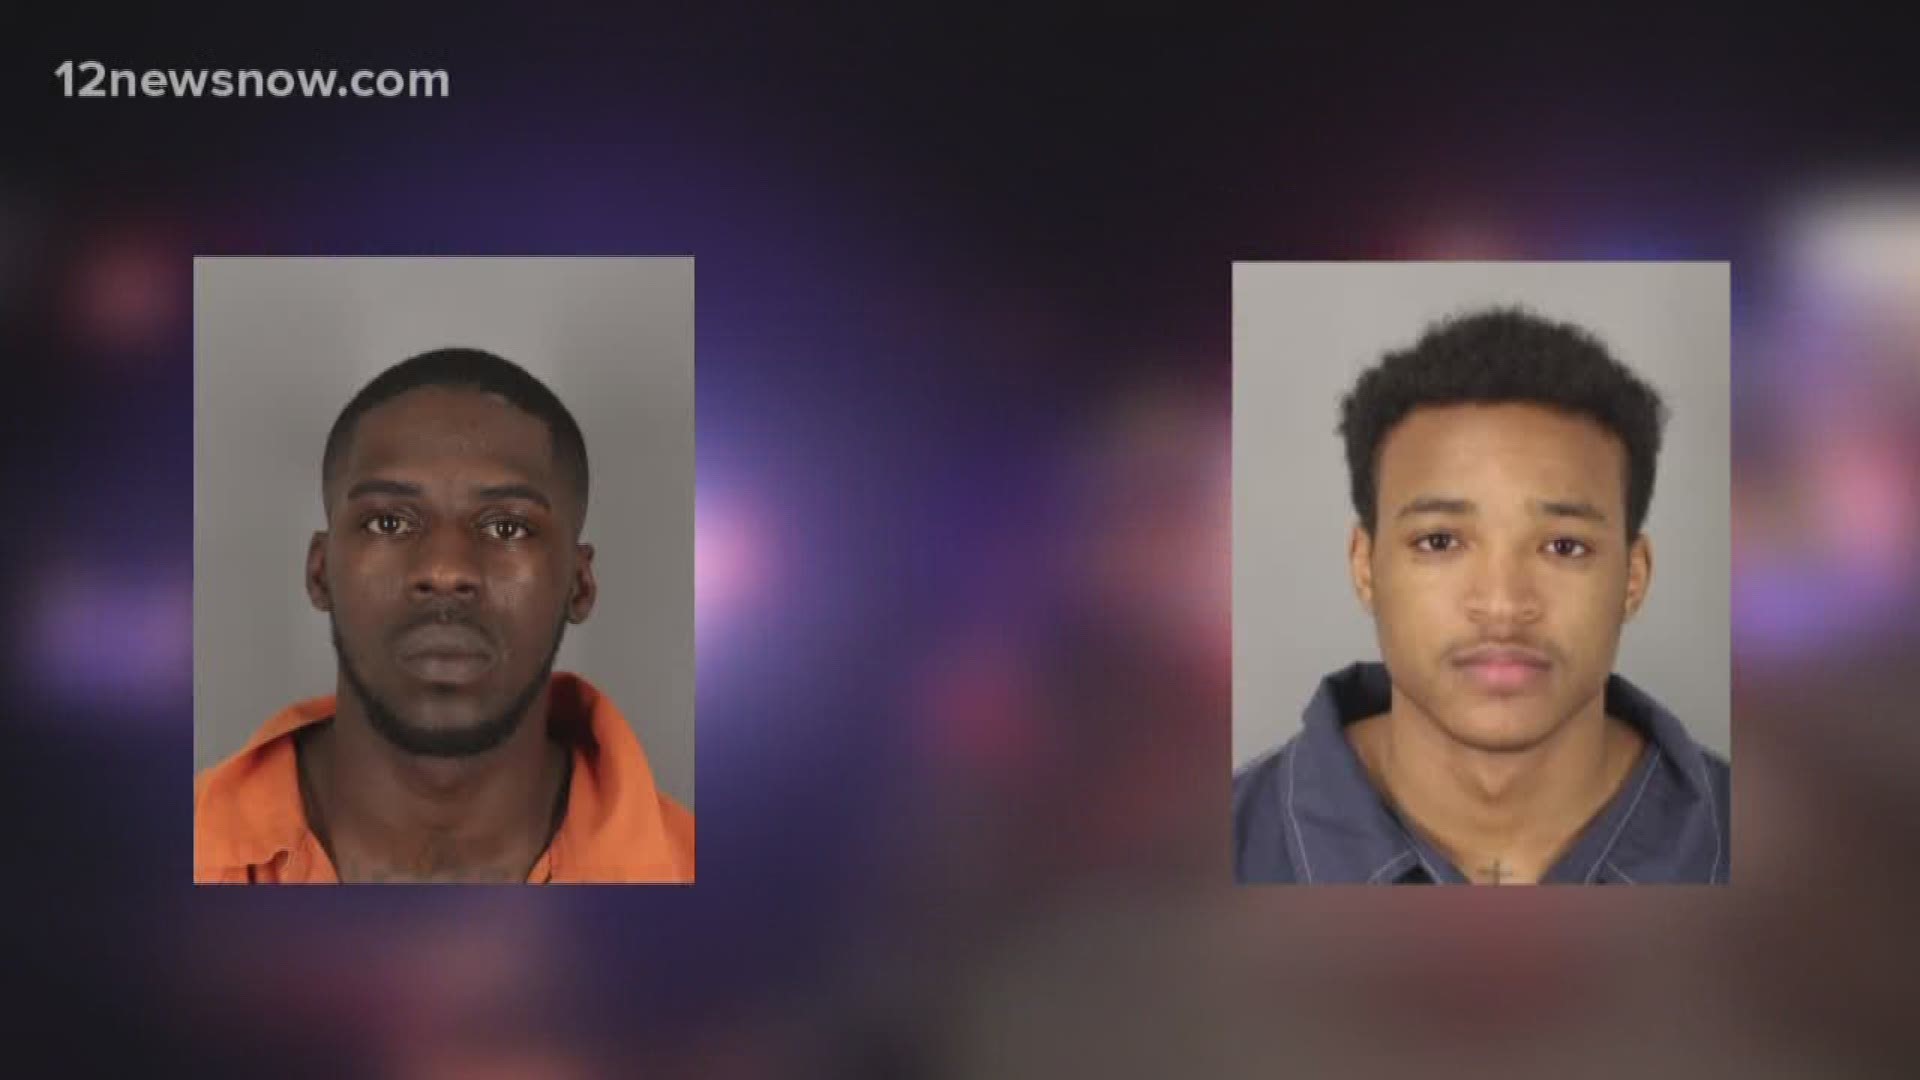 Officers arrested Joshua Barlow and Jaylan Thomas in connection to shooting.